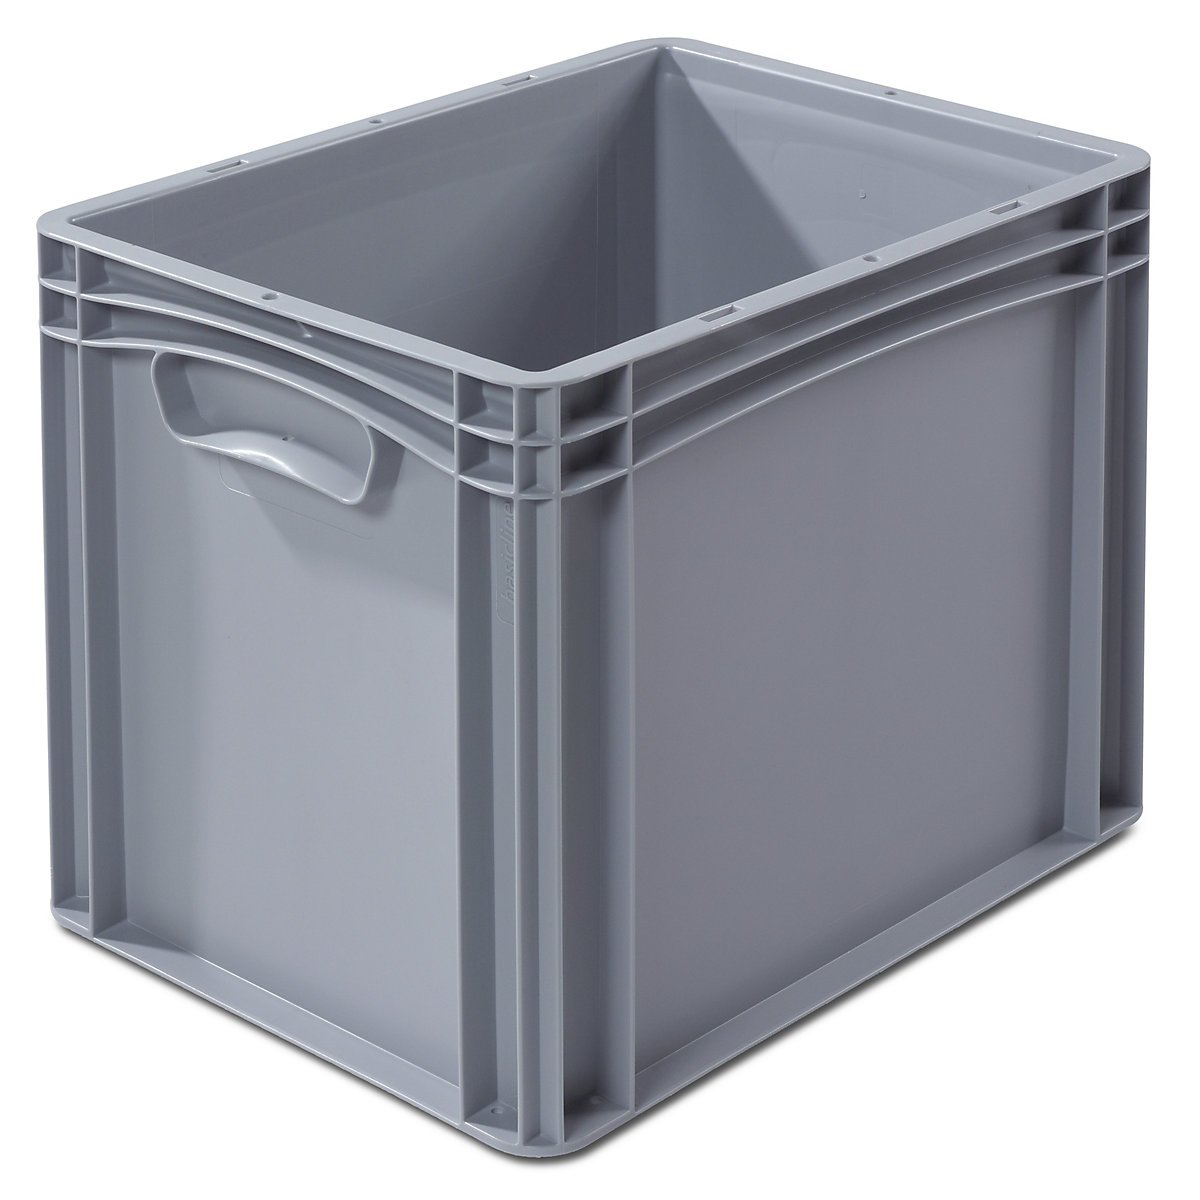 Euro size container, LxW 400 x 300 mm, solid walls and base, height 320 mm-7